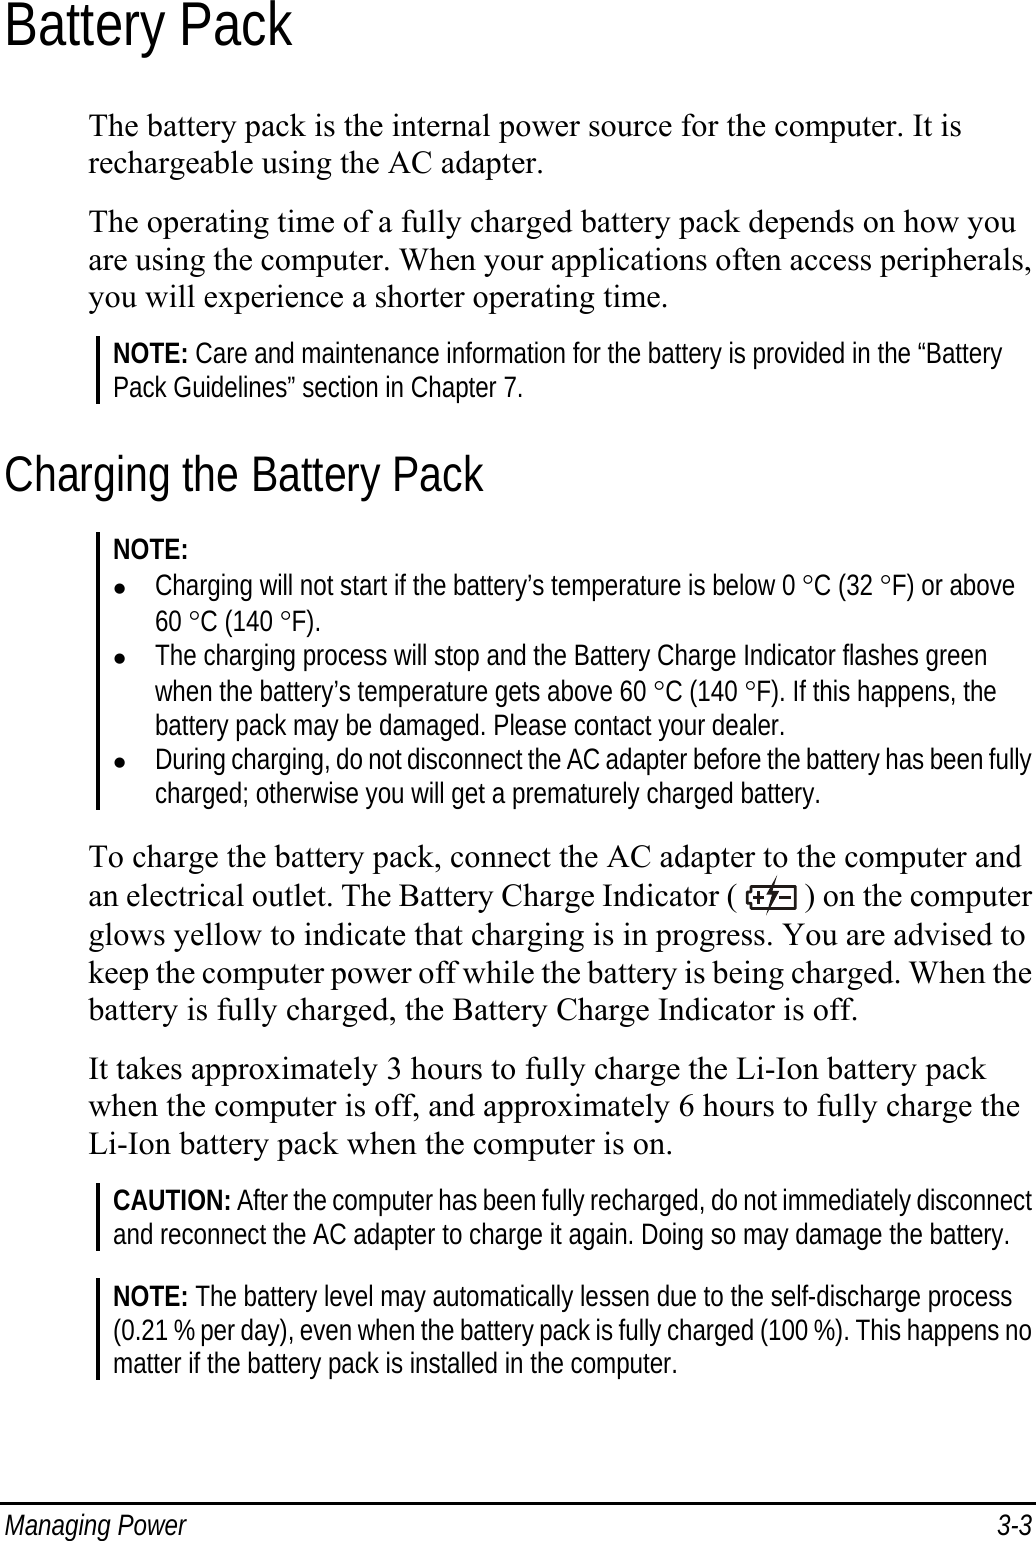  Managing Power  3-3 Battery Pack The battery pack is the internal power source for the computer. It is rechargeable using the AC adapter. The operating time of a fully charged battery pack depends on how you are using the computer. When your applications often access peripherals, you will experience a shorter operating time. NOTE: Care and maintenance information for the battery is provided in the “Battery Pack Guidelines” section in Chapter 7. Charging the Battery Pack NOTE: z Charging will not start if the battery’s temperature is below 0 °C (32 °F) or above 60 °C (140 °F). z The charging process will stop and the Battery Charge Indicator flashes green when the battery’s temperature gets above 60 °C (140 °F). If this happens, the battery pack may be damaged. Please contact your dealer. z During charging, do not disconnect the AC adapter before the battery has been fully charged; otherwise you will get a prematurely charged battery.  To charge the battery pack, connect the AC adapter to the computer and an electrical outlet. The Battery Charge Indicator (   ) on the computer glows yellow to indicate that charging is in progress. You are advised to keep the computer power off while the battery is being charged. When the battery is fully charged, the Battery Charge Indicator is off. It takes approximately 3 hours to fully charge the Li-Ion battery pack when the computer is off, and approximately 6 hours to fully charge the Li-Ion battery pack when the computer is on. CAUTION: After the computer has been fully recharged, do not immediately disconnect and reconnect the AC adapter to charge it again. Doing so may damage the battery.  NOTE: The battery level may automatically lessen due to the self-discharge process (0.21 % per day), even when the battery pack is fully charged (100 %). This happens no matter if the battery pack is installed in the computer. 